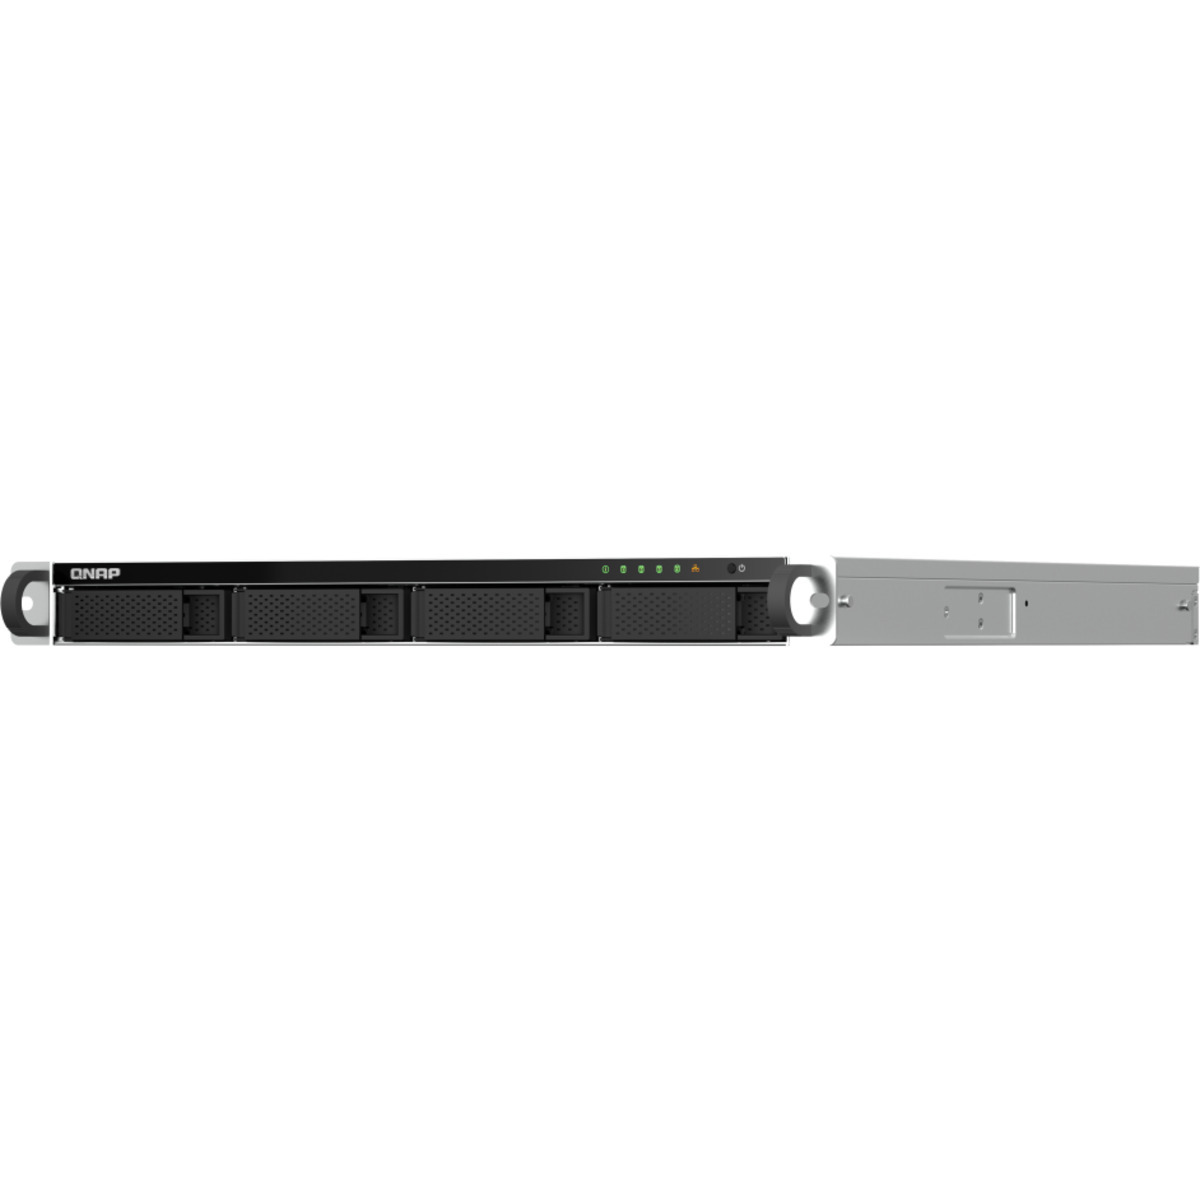 QNAP TS-464U-RP 88tb 4-Bay RackMount Multimedia / Power User / Business NAS - Network Attached Storage Device 4x22tb Seagate EXOS X22 ST22000NM001E 3.5 7200rpm SATA 6Gb/s HDD ENTERPRISE Class Drives Installed - Burn-In Tested TS-464U-RP